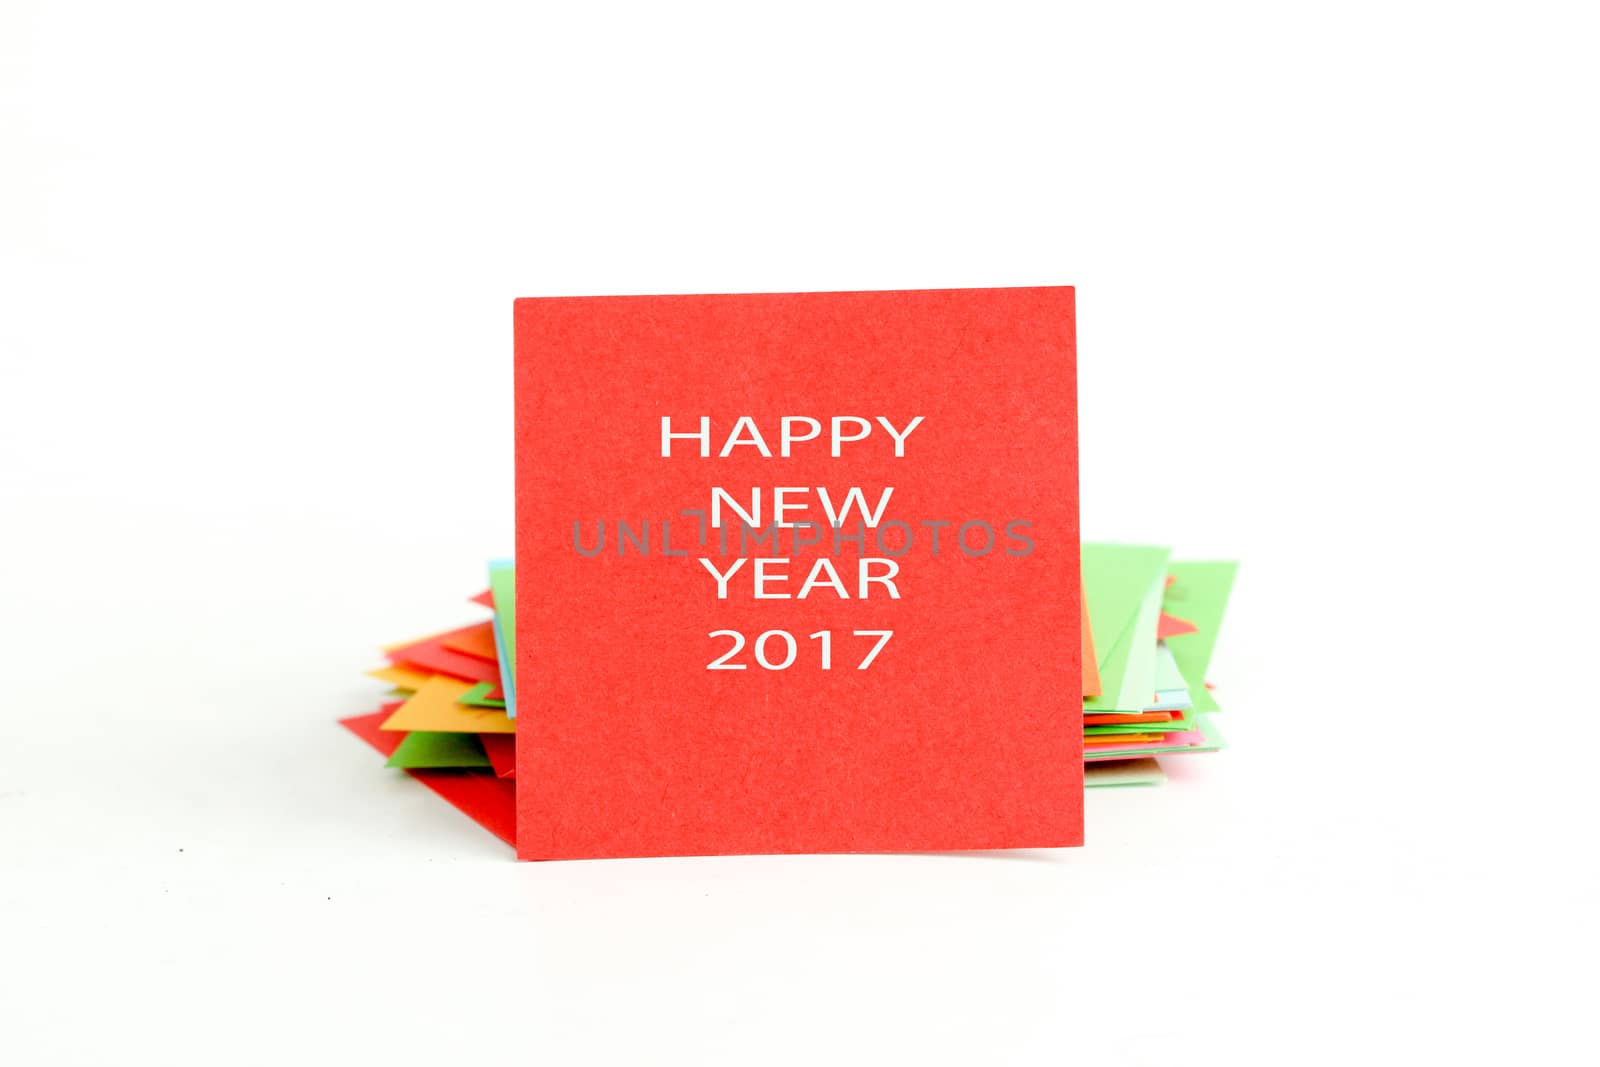 picture of a red note paper with text happy new year 2017